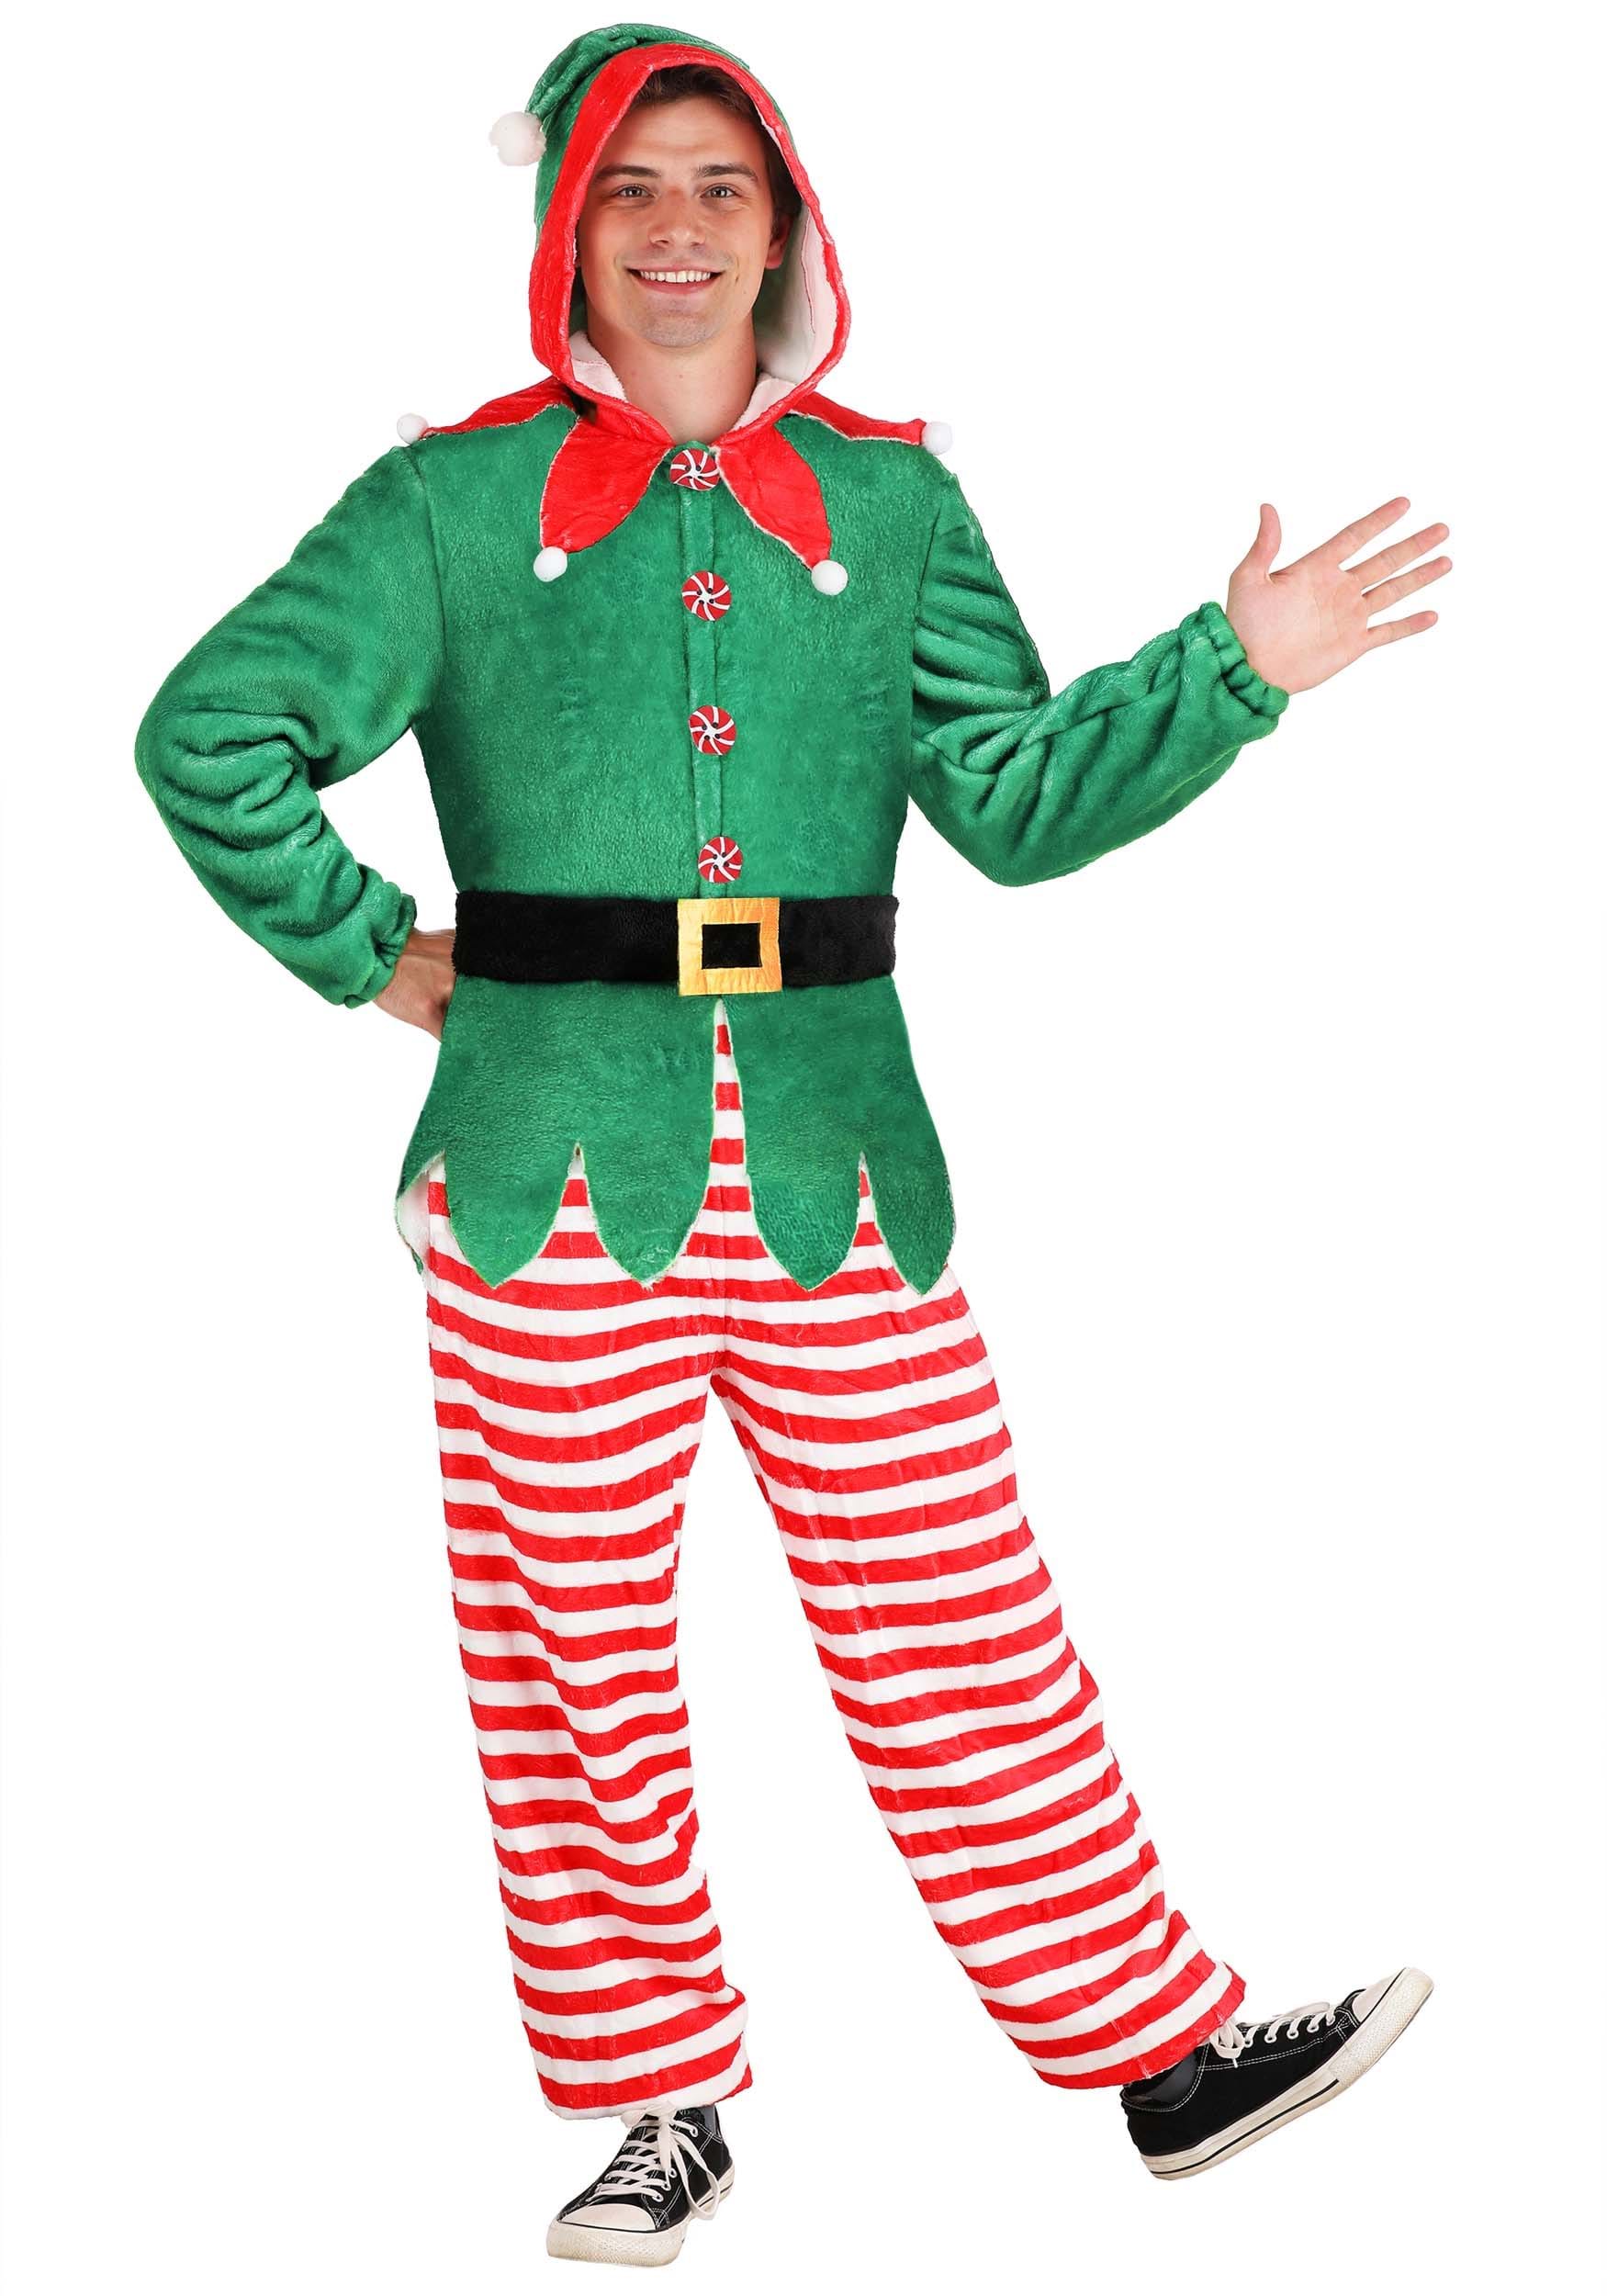 Photos - Fancy Dress ELF FUN Costumes  Adult Jumpsuit Costume Green/Red/White FUN3427AD 